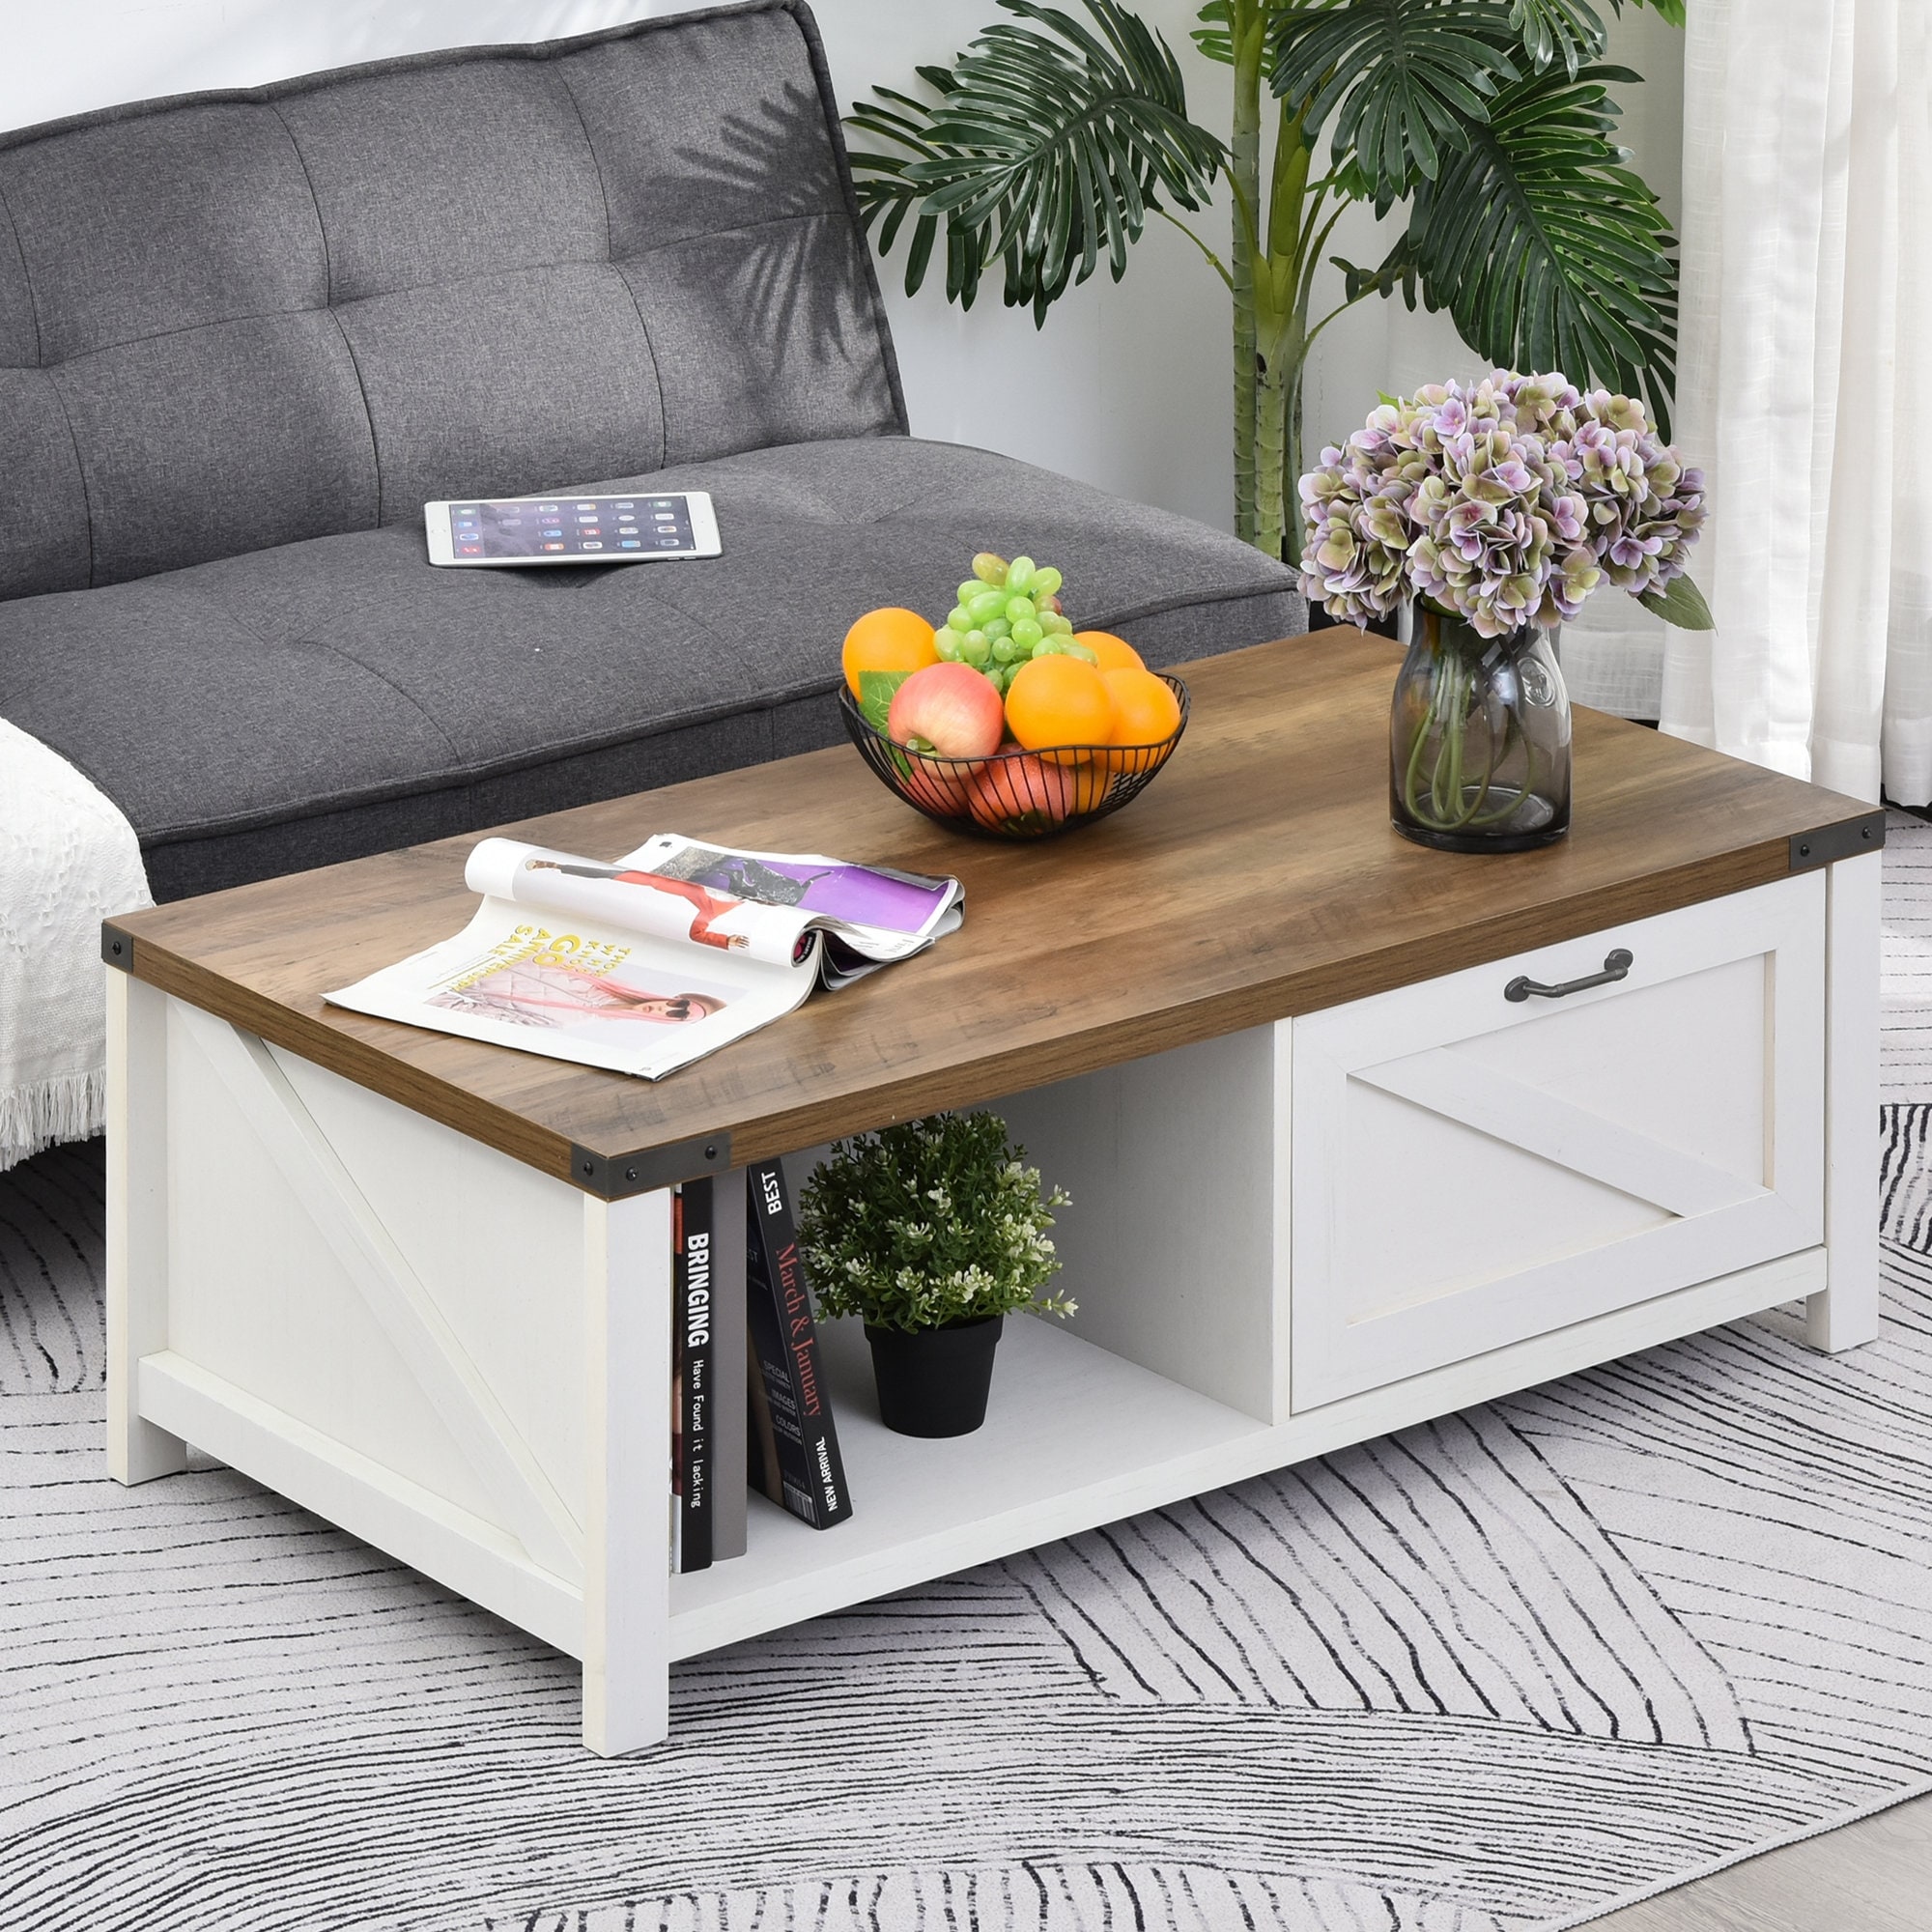 https://ak1.ostkcdn.com/images/products/is/images/direct/4eb6e7758e4fda77265c8e91653fa2b5c956fc70/HomCom-Industrial-Coffee-Table-Side-End-Desk-with-1-Drawer%2C-2-Open-Storage-Shelves%2C-and-a-Modern-Farmhouse-Style.jpg